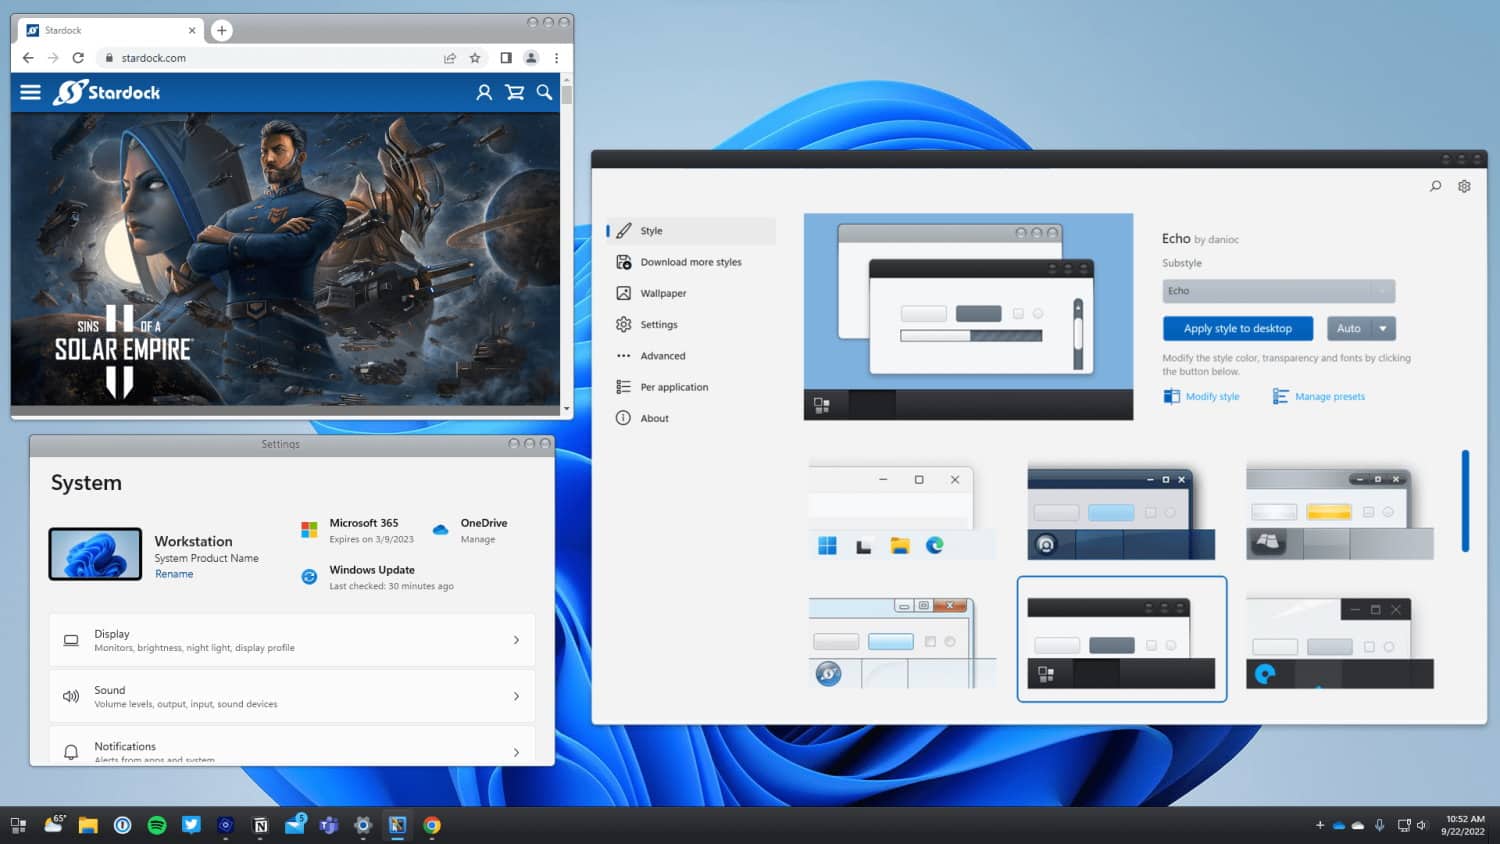 Stardock releases public beta of WindowBlinds 11 complete with full Windows 11 support - BetaNews